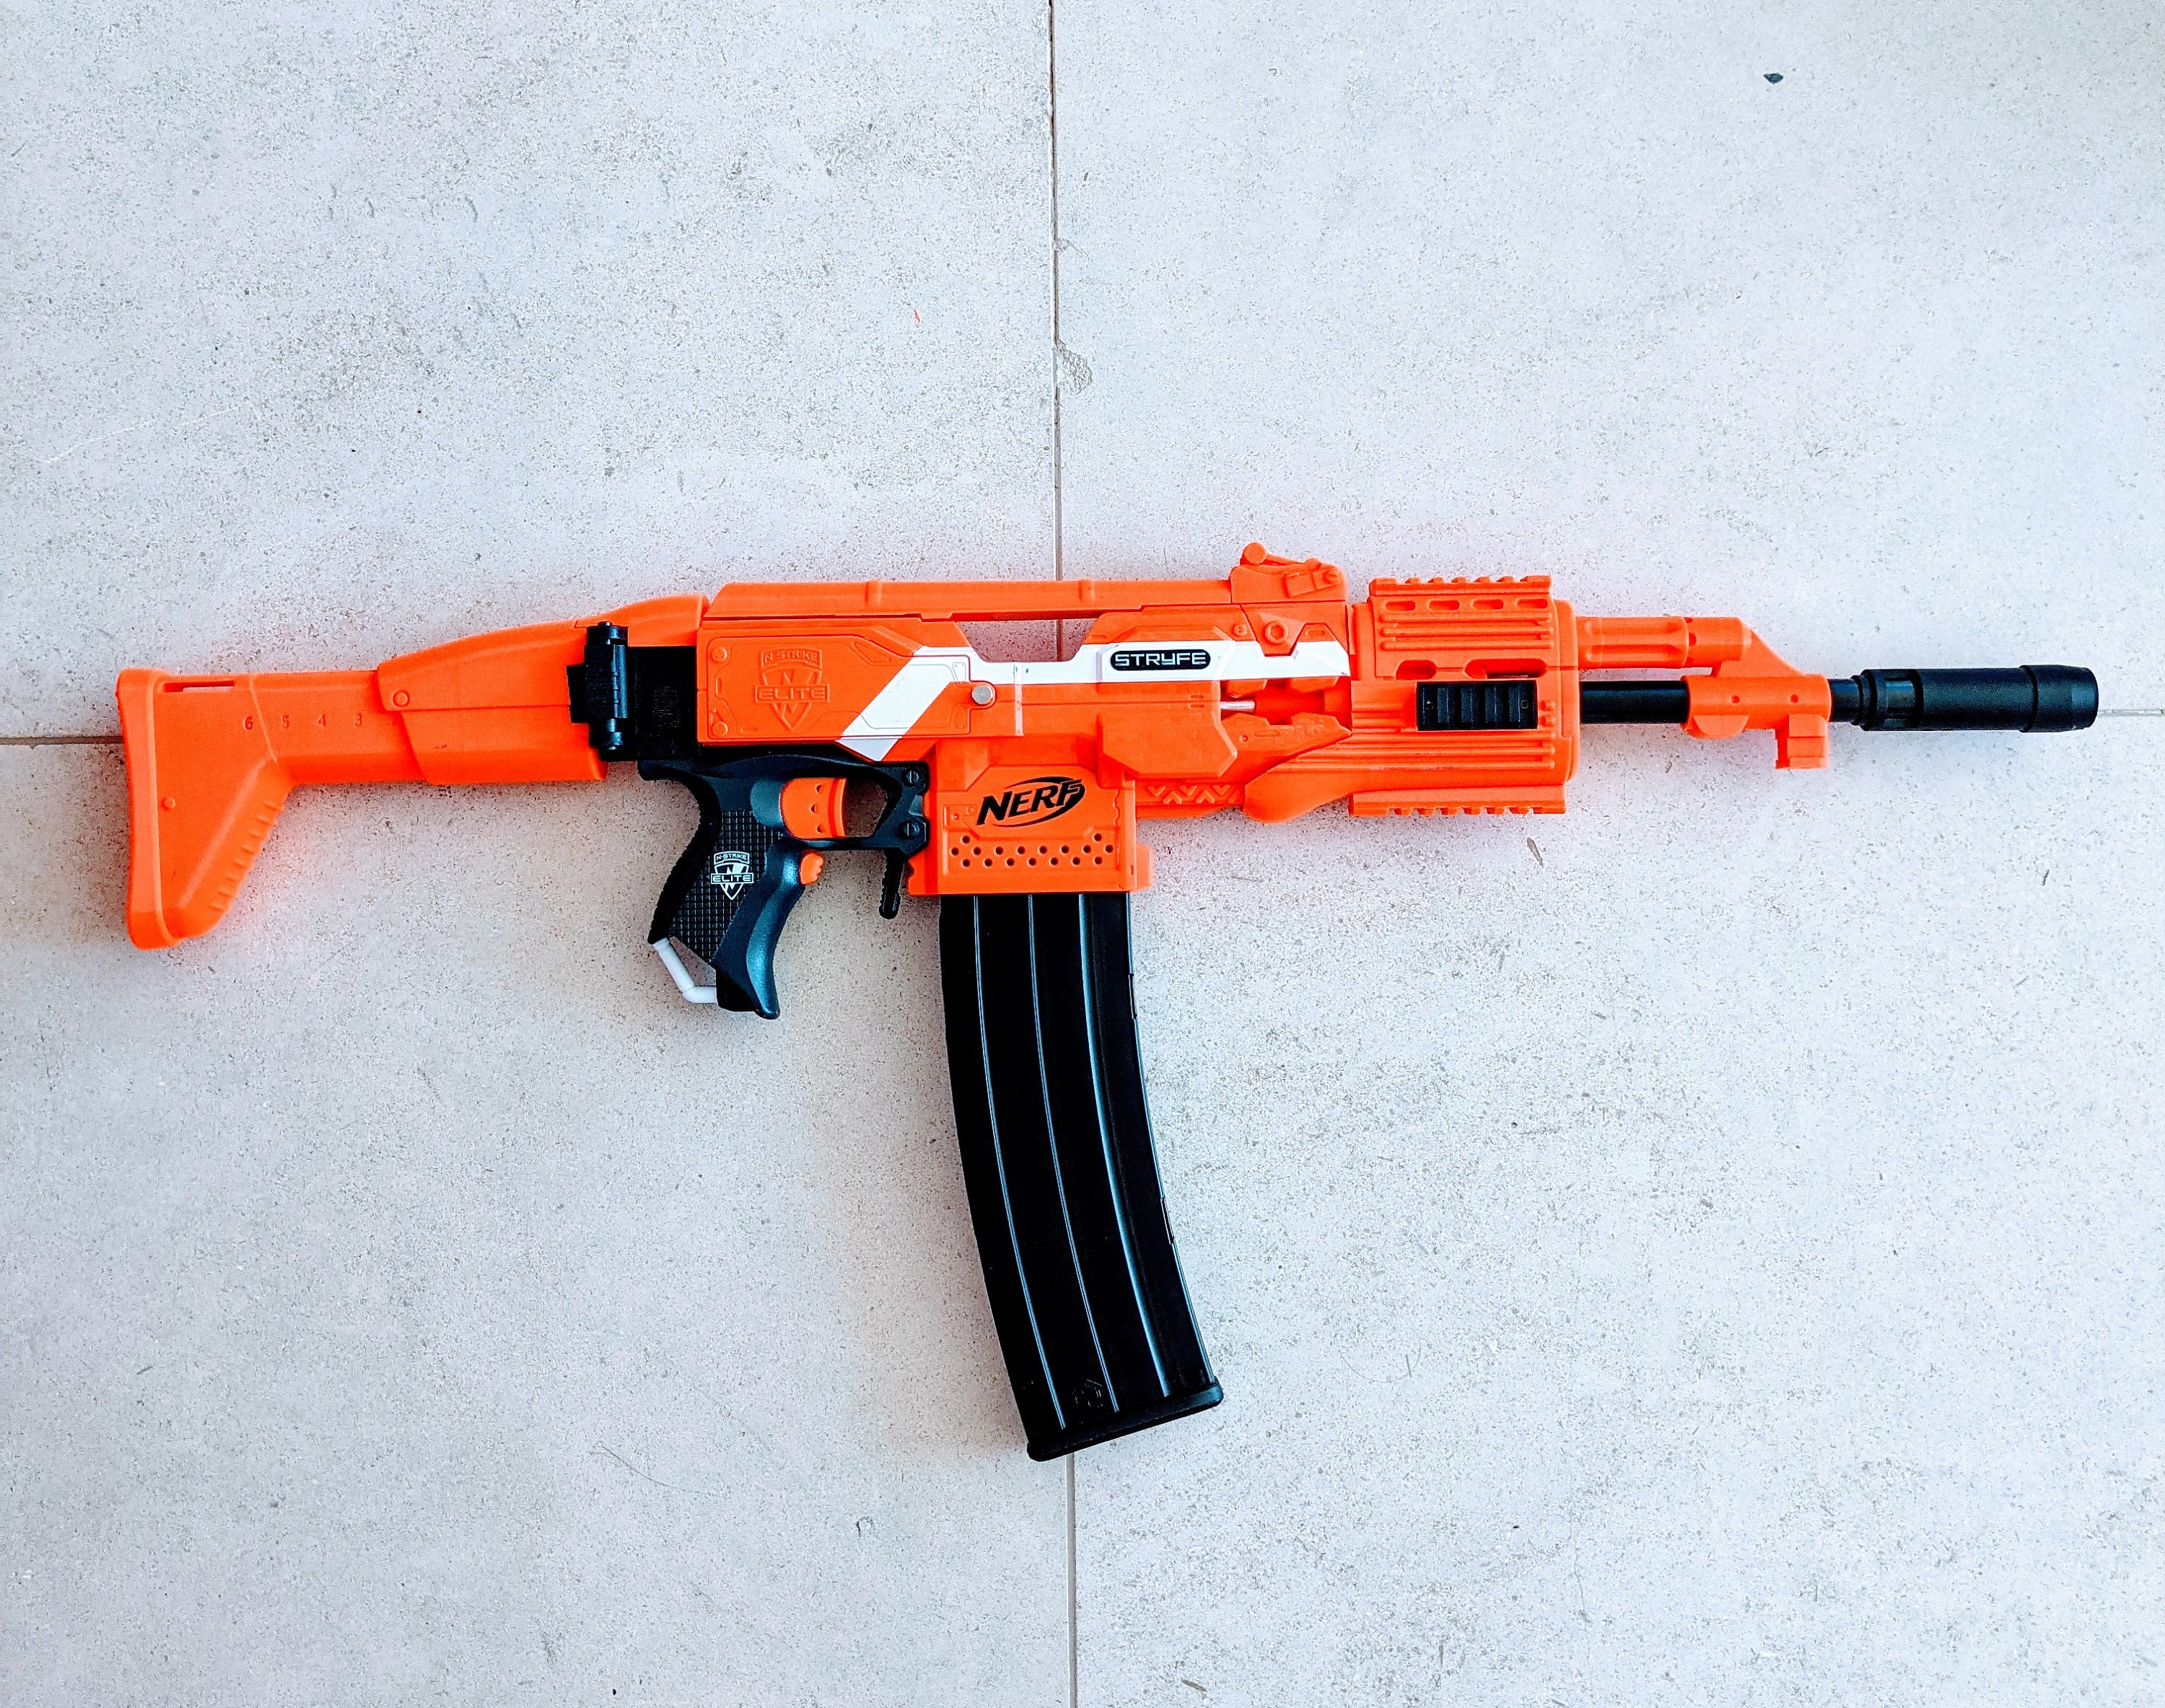 AK-47 Mod Kit for Nerf Stryfe, AK-47 Model Modification Toy for Outdoor  Play